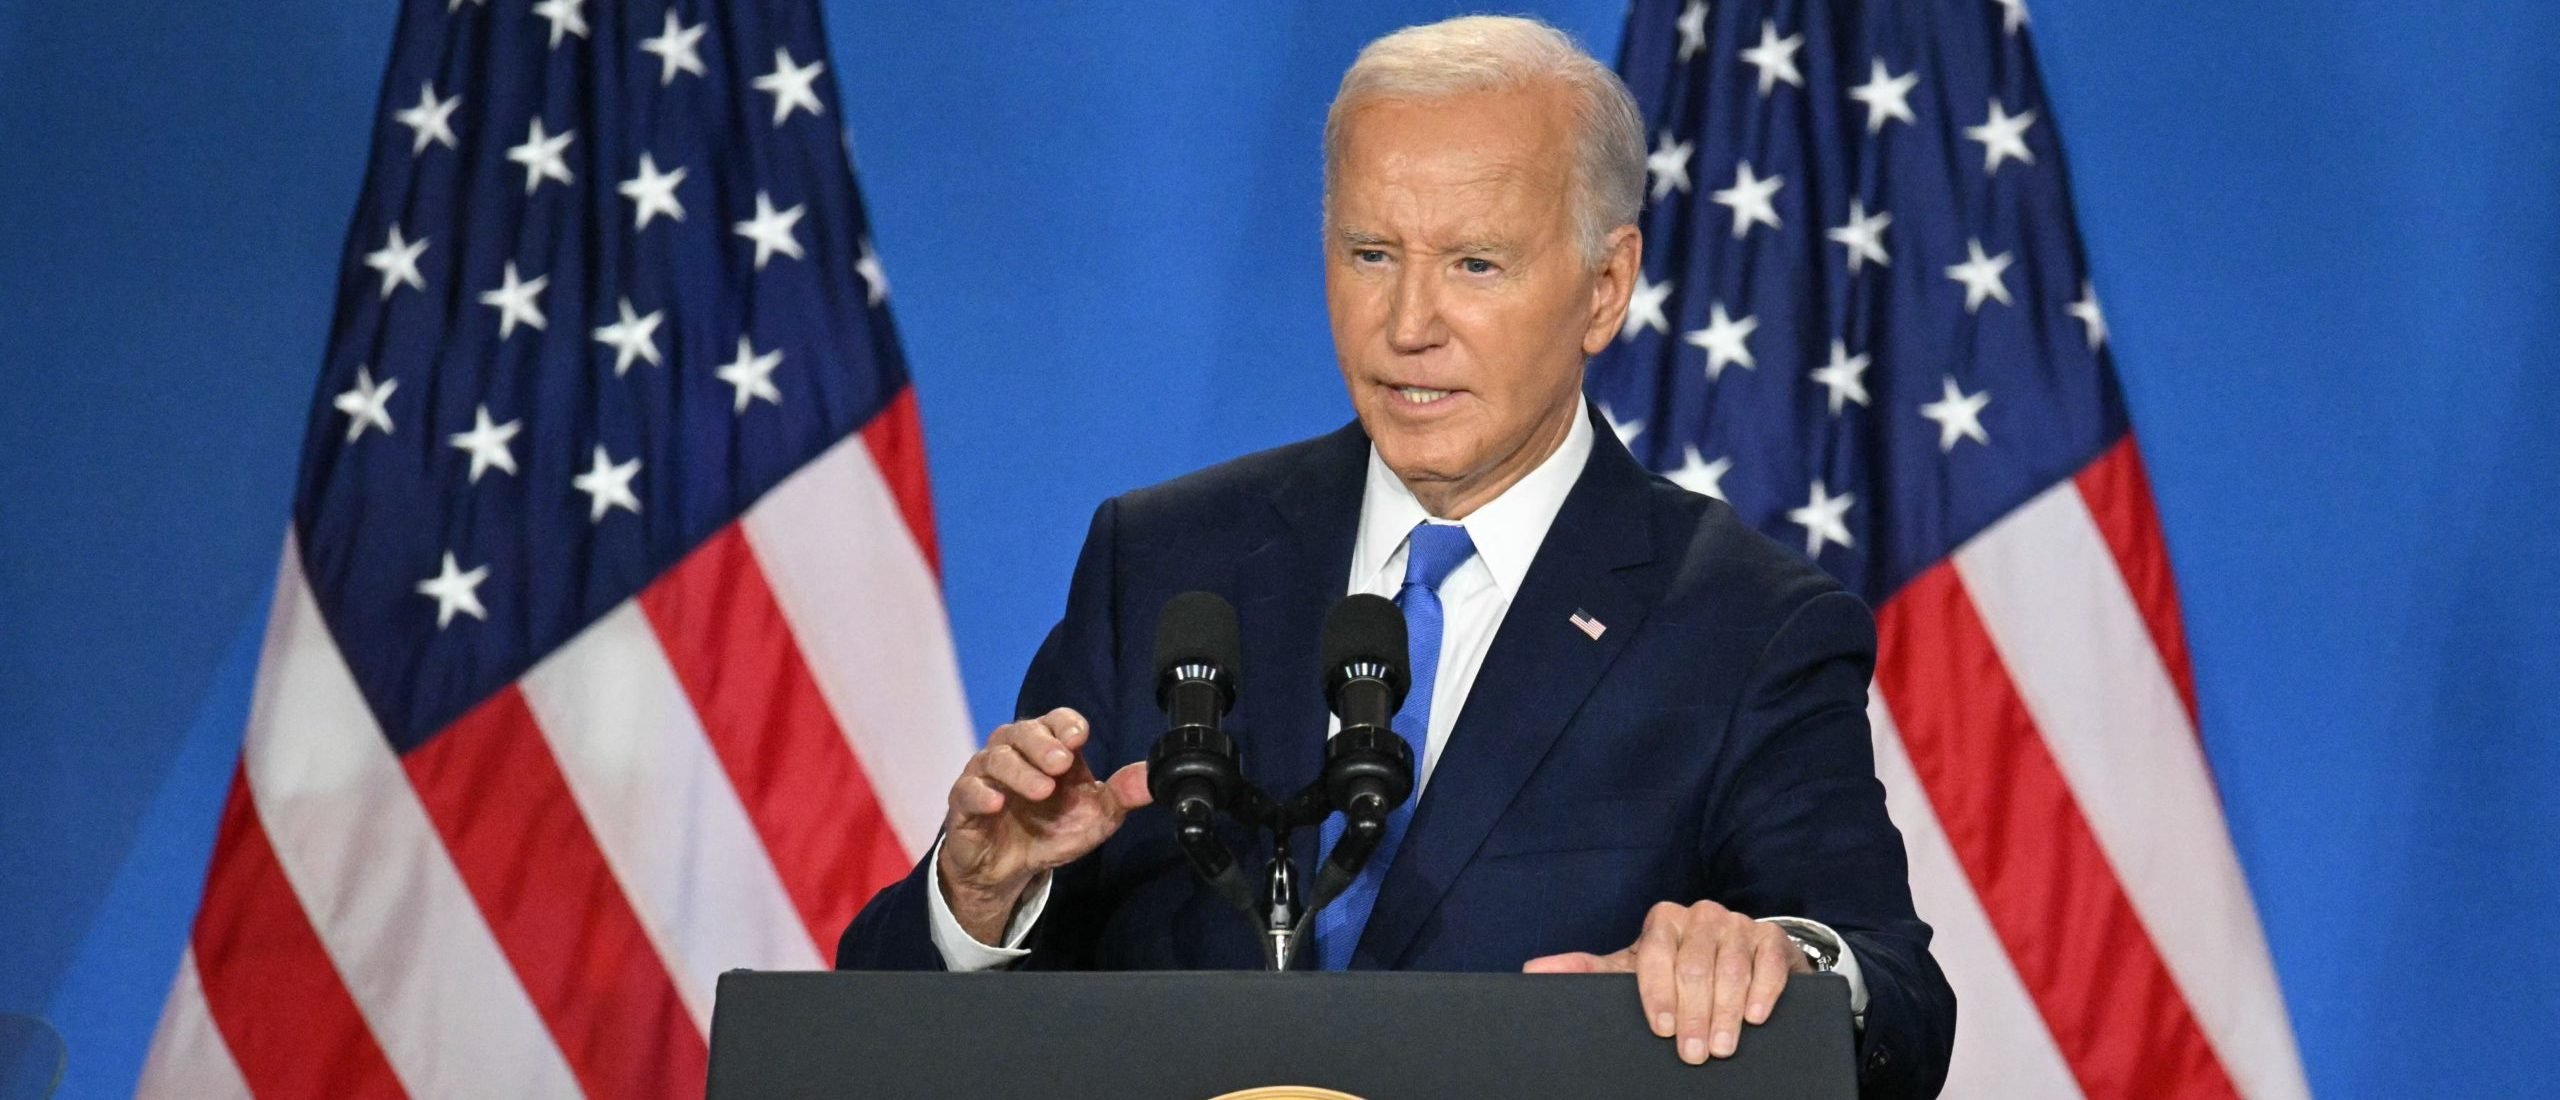 US President Joe Biden speaks during a press conference at the close of the 75th NATO Summit at the Walter E. Washington Convention Center in Washington, DC on July 11, 2024. (Photo by Mandel NGAN / AFP) (Photo by MANDEL NGAN/AFP via Getty Images)